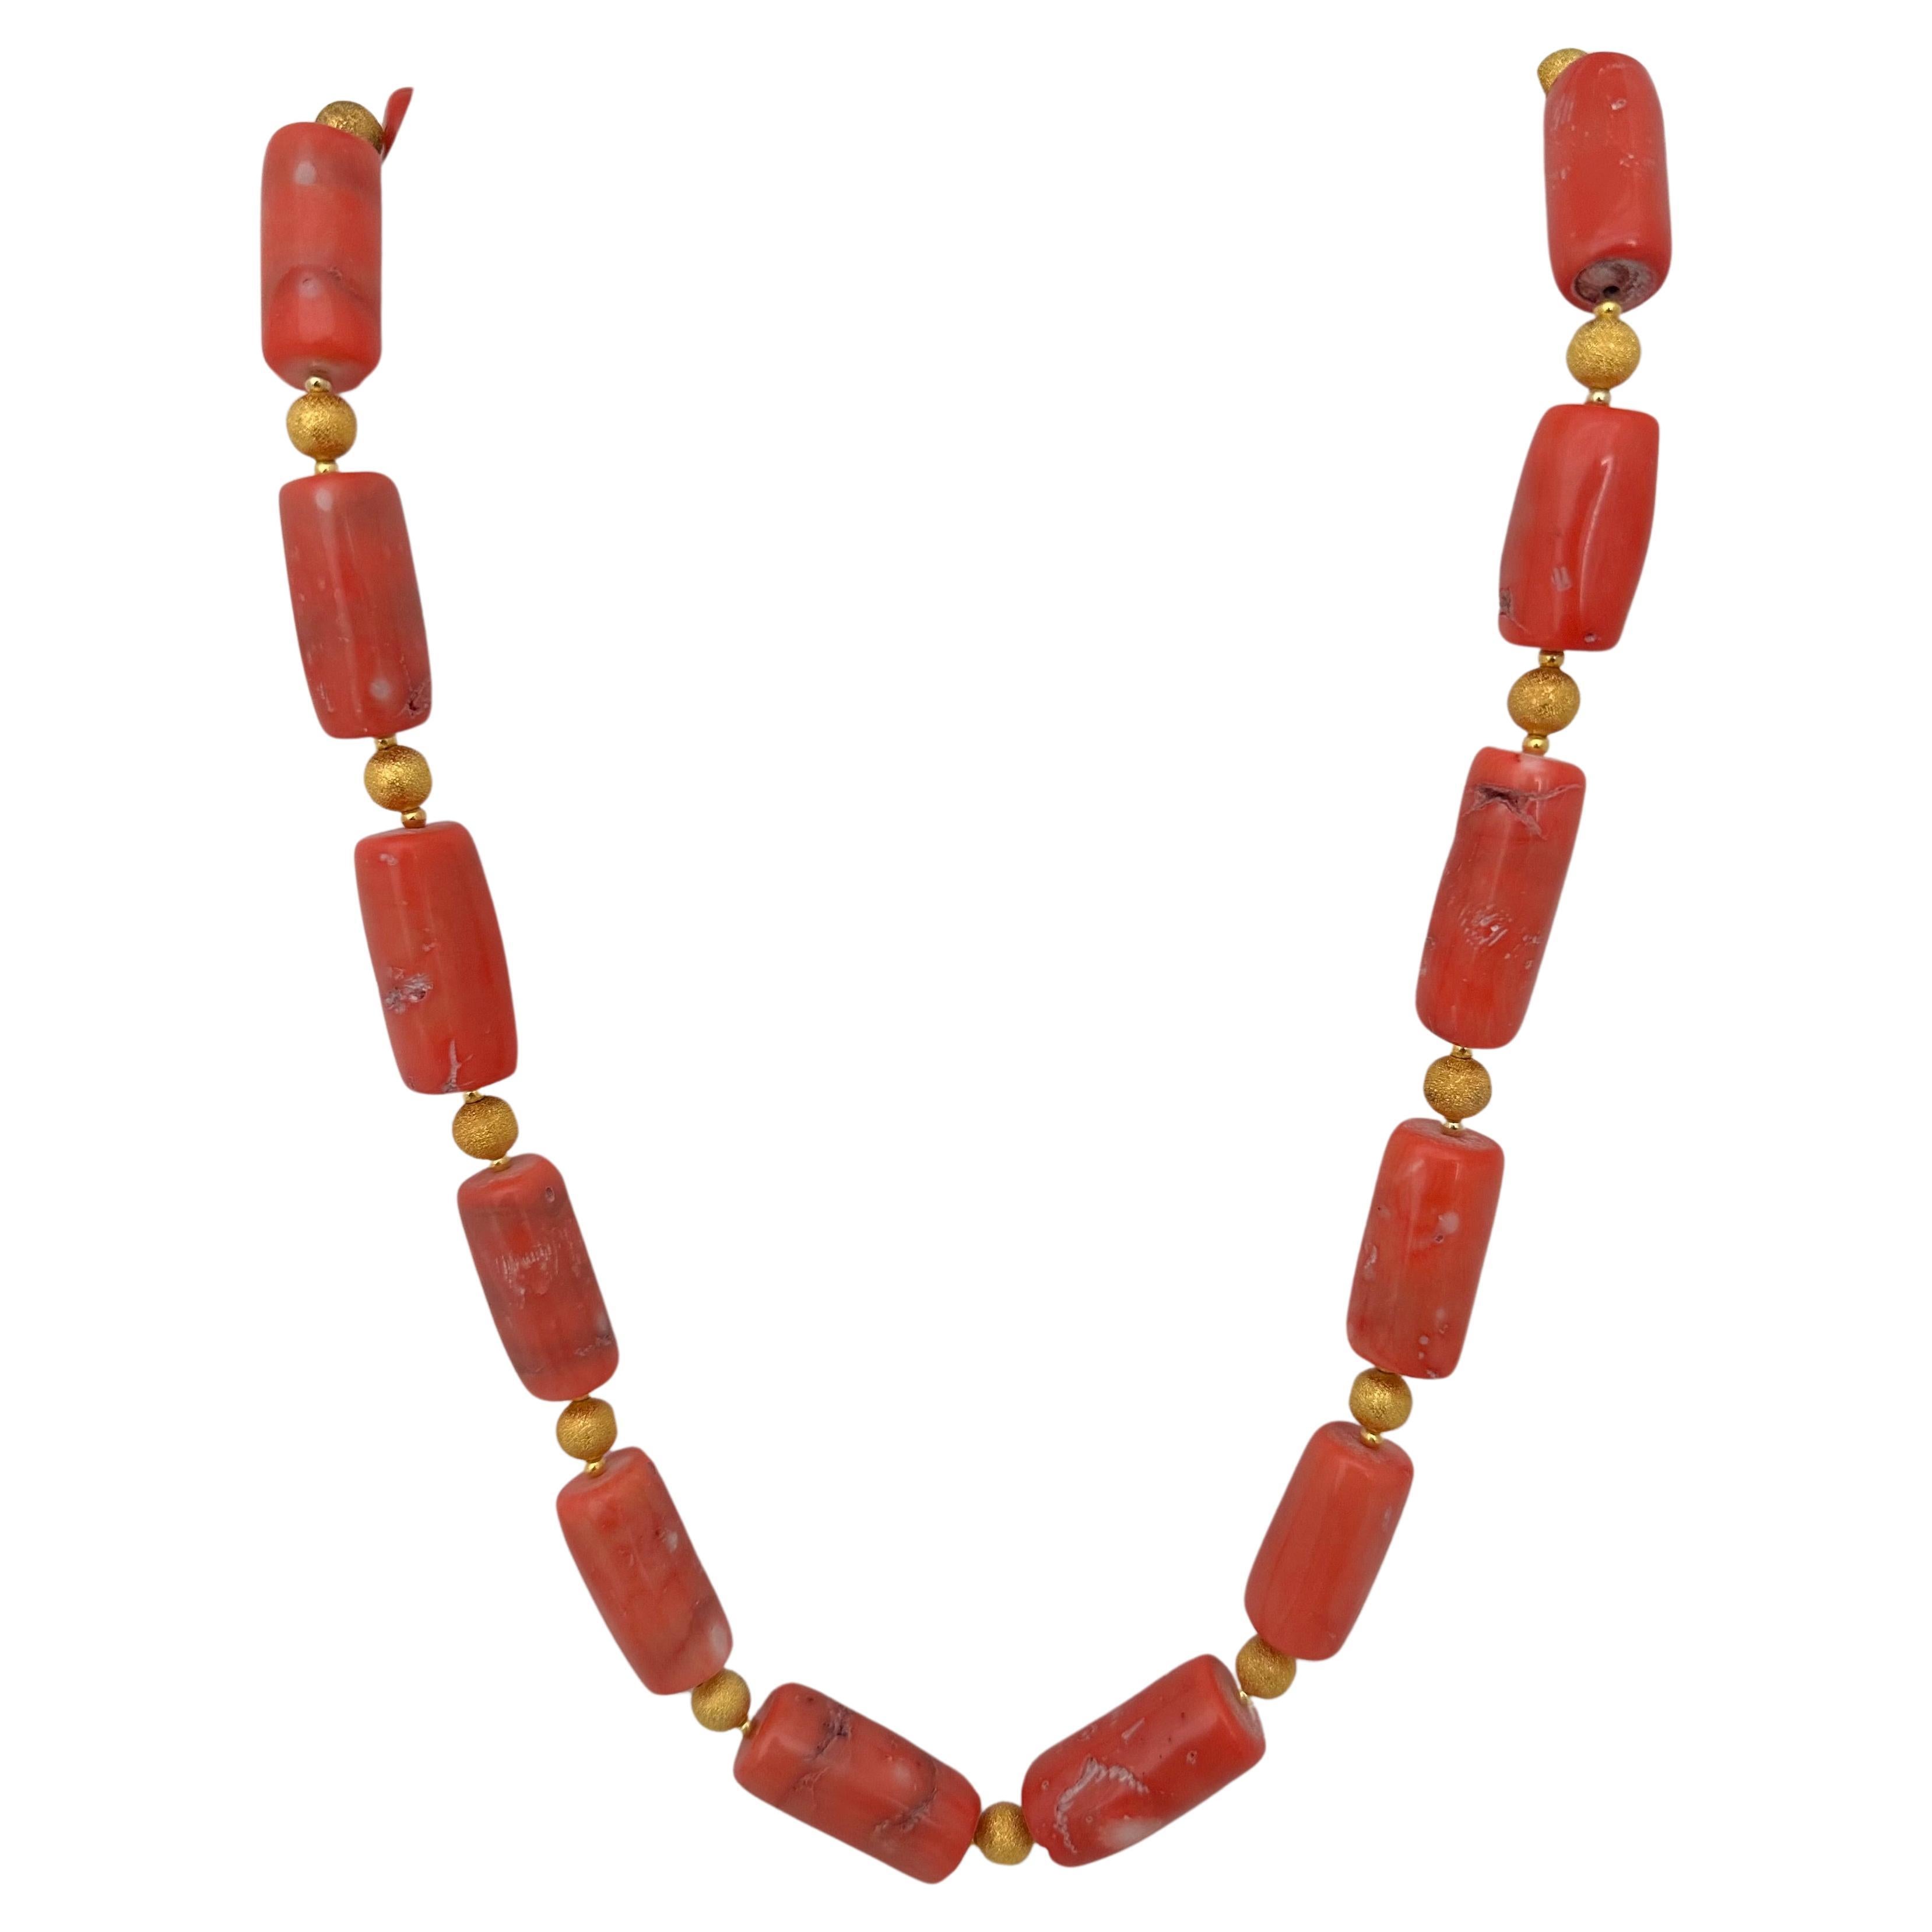 Handmade Gold Plated Beads & Salmon Barrel Shape Coral Beaded 27" Necklace #C35 For Sale